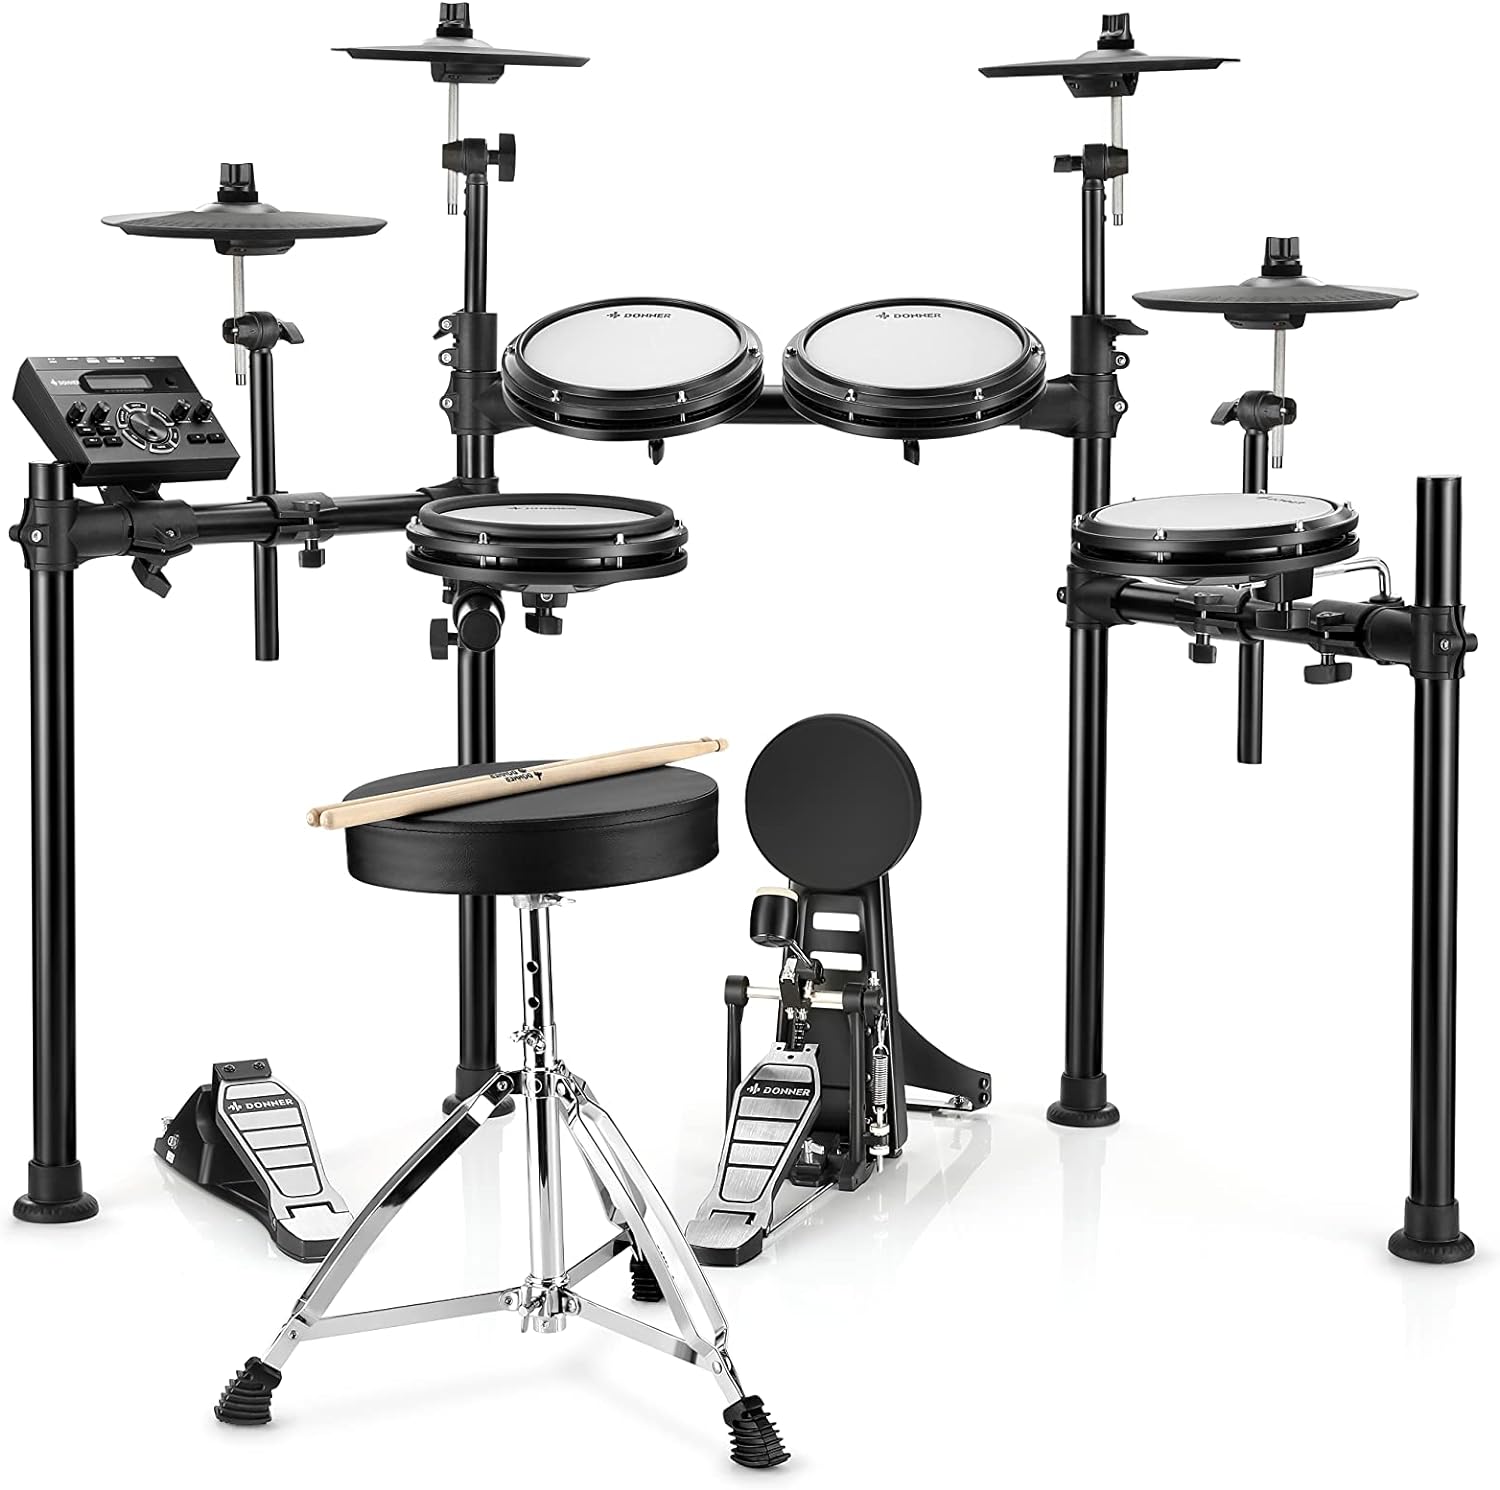 Donner DED-200 Electronic Drum Set, Electric Kit with Quiet Mesh Pads, 2 Cymbals w/Choke, 31 Kits and 450+ Sounds, Throne, Headphones, Sticks, USB MIDI, Melodics Lessons (5 4 Cymbals)